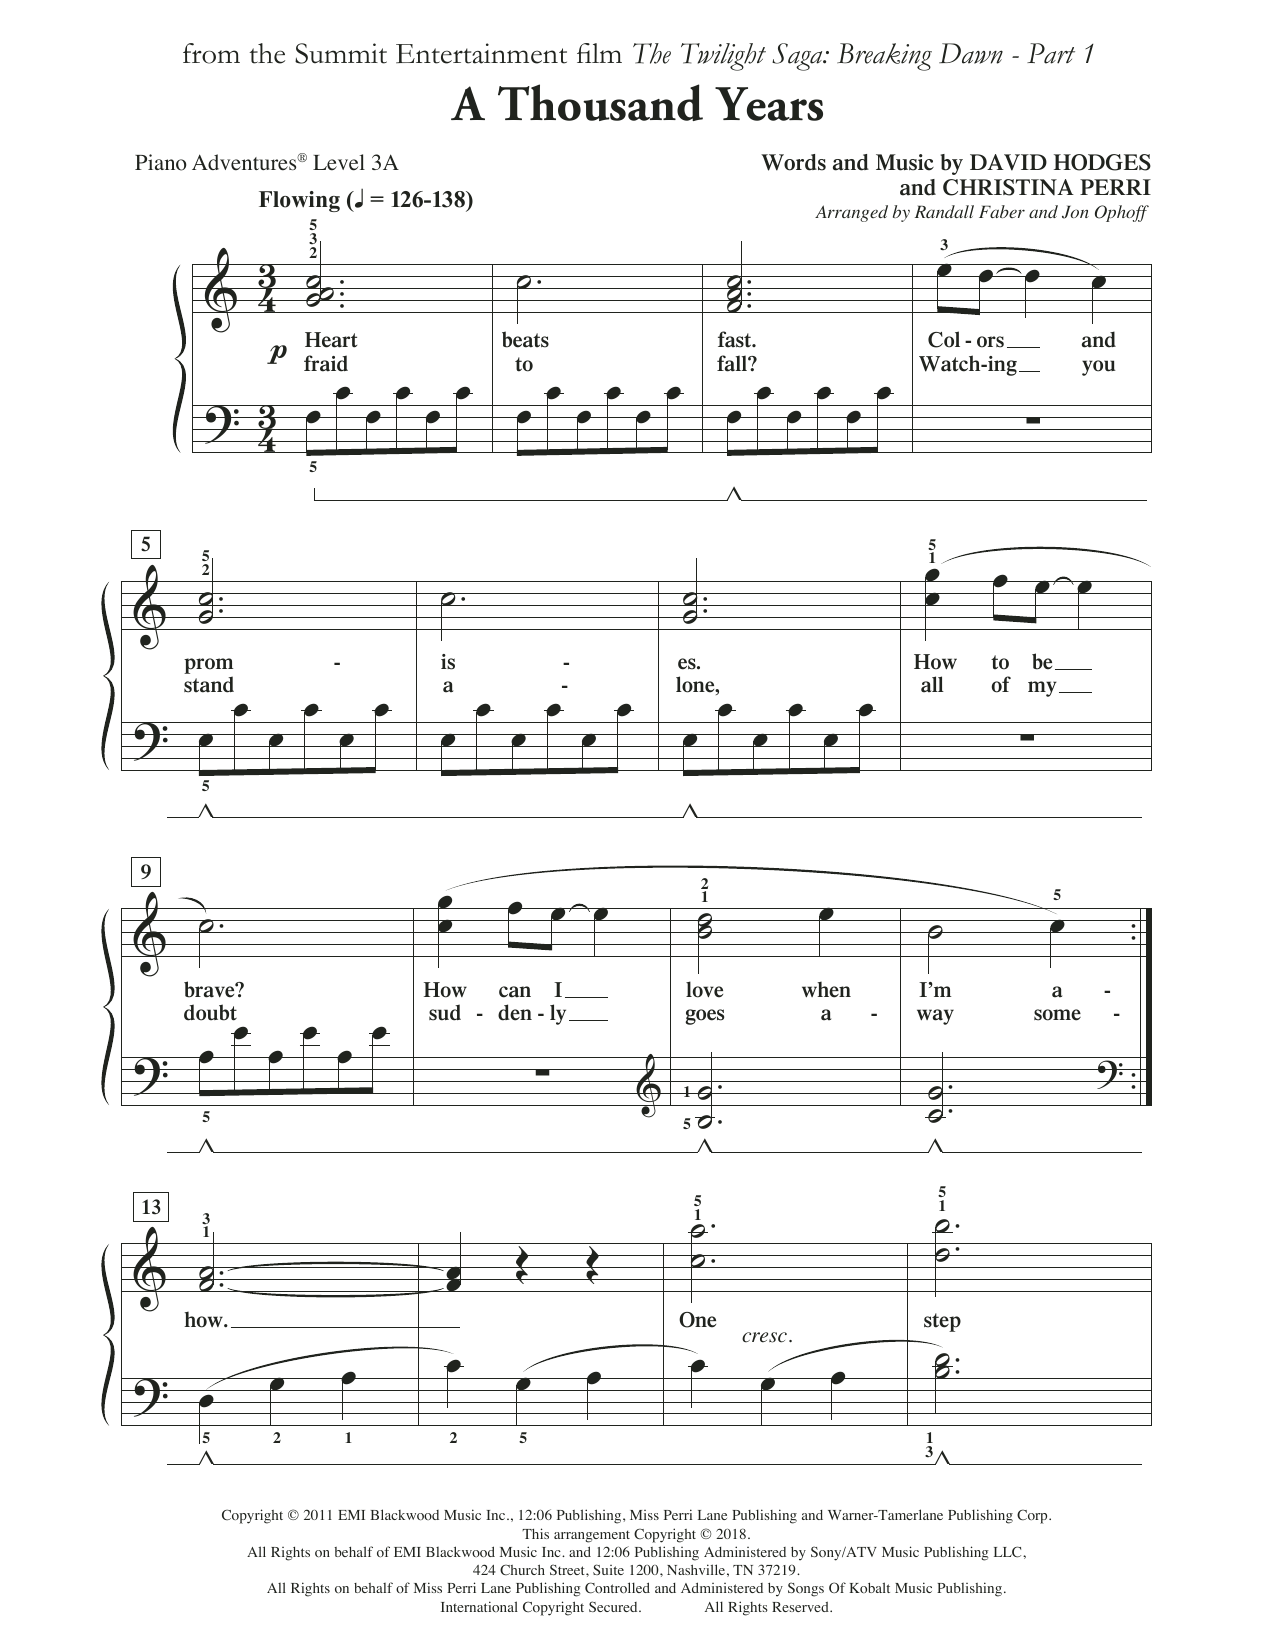 Randall Faber & Jon Ophoff A Thousand Years sheet music notes and chords arranged for Piano Adventures